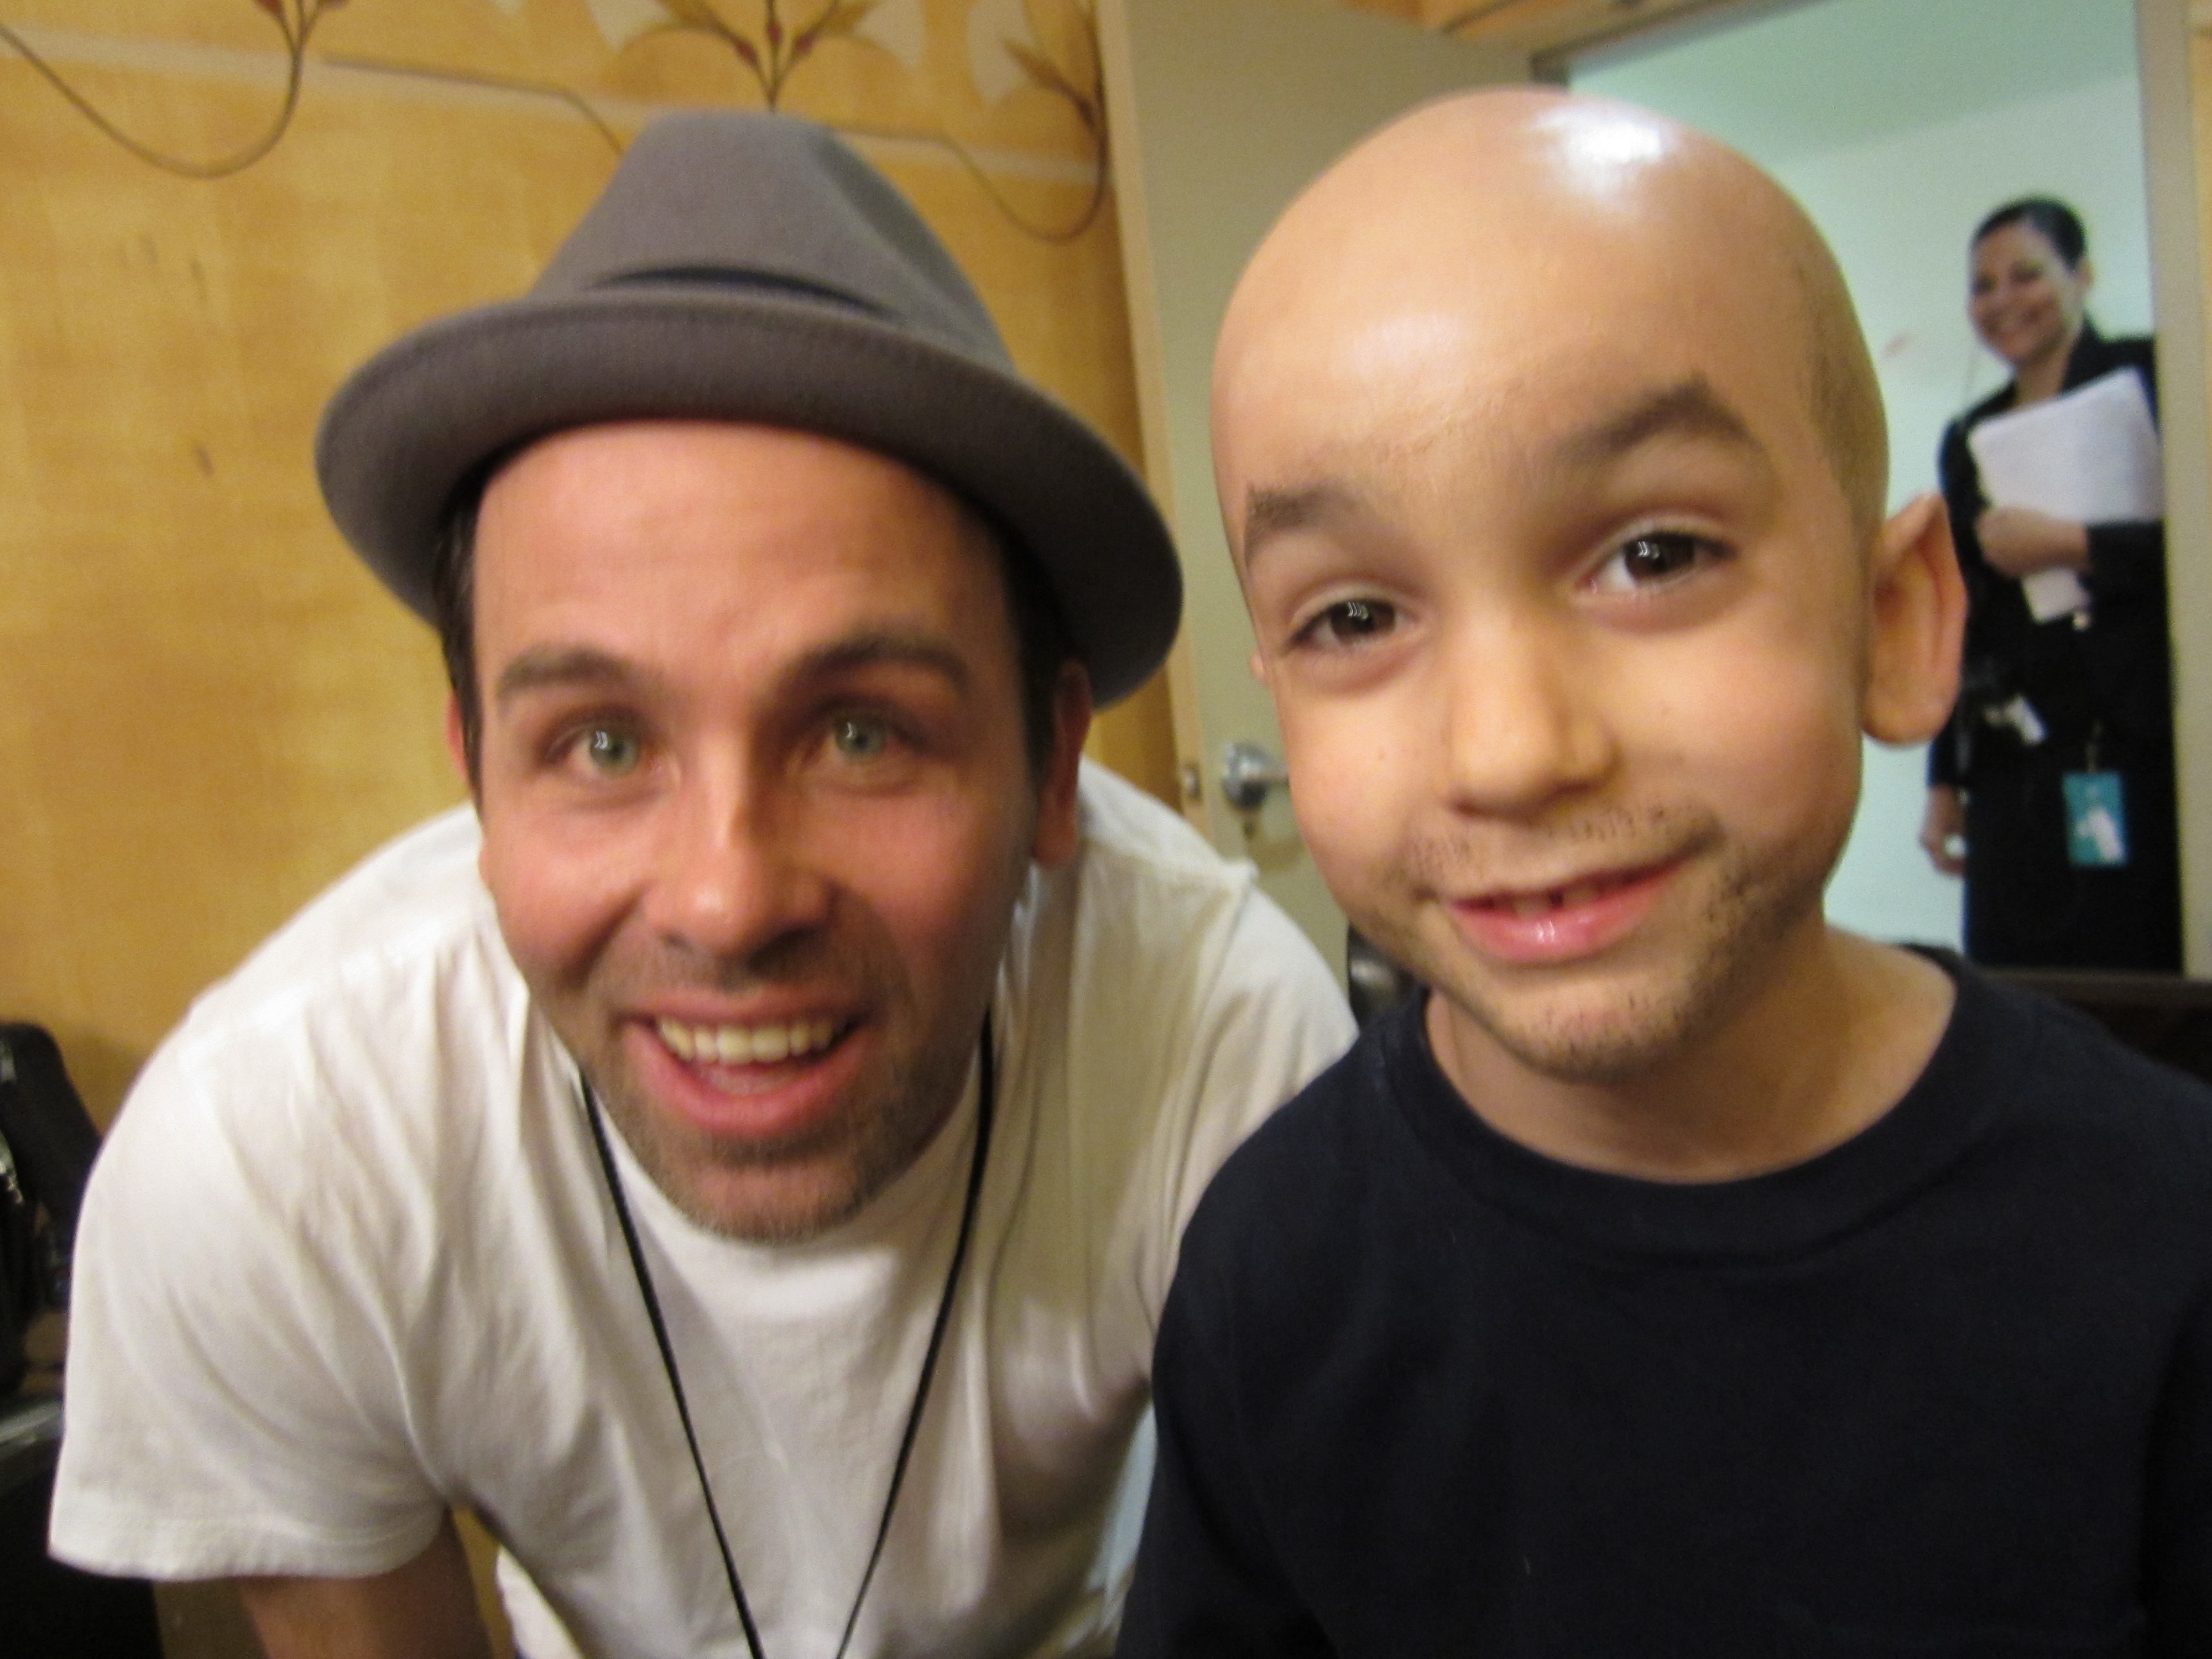 Adam Chernick with special effect artist who put his very first bald cap on a six year old for Critic's Choice 2012